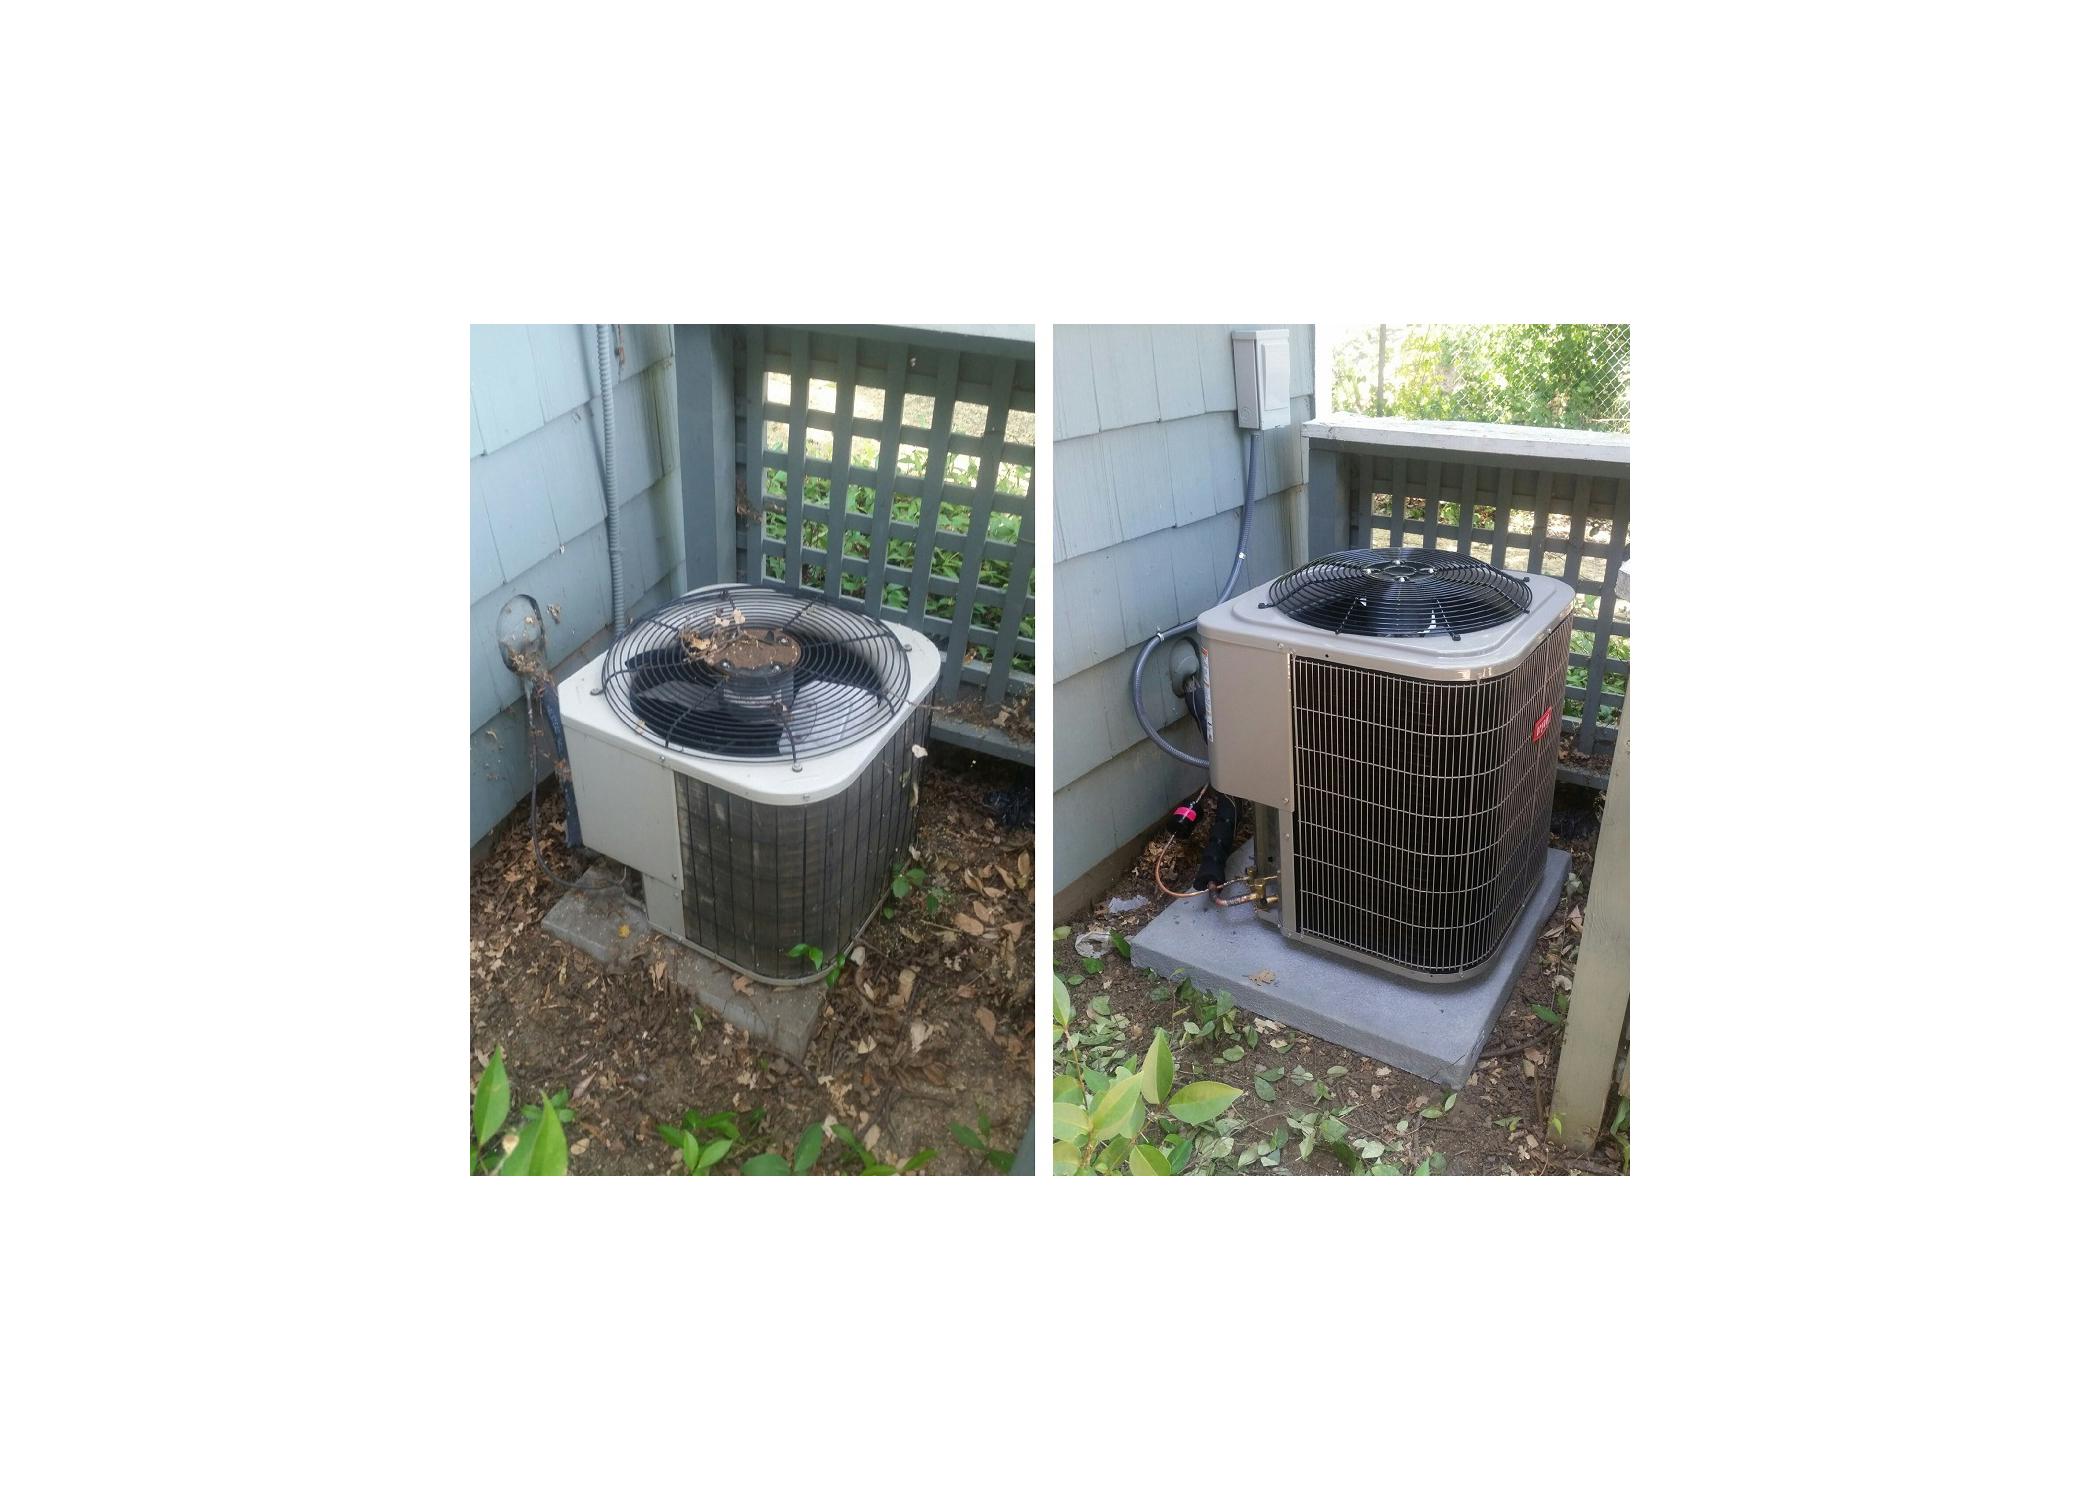 Picture of All Weather Heating & Air Conditioning replaced the old air conditioner on the left with the new Bryant air conditioner on the right. - All Weather Heating & Air Conditioning Inc.